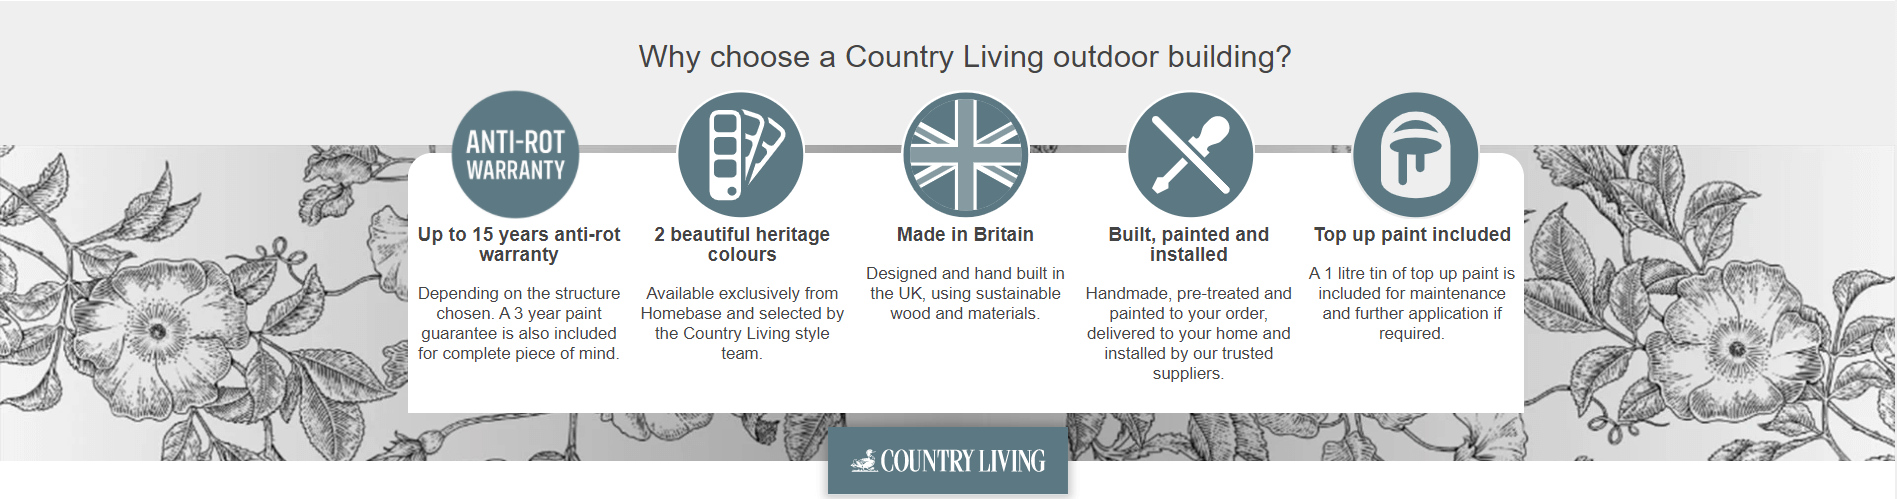 https://static.thcdn.com/widgets/182-en/22/Why_Choose_a_country_Living_Shed_with_logo-102622.png